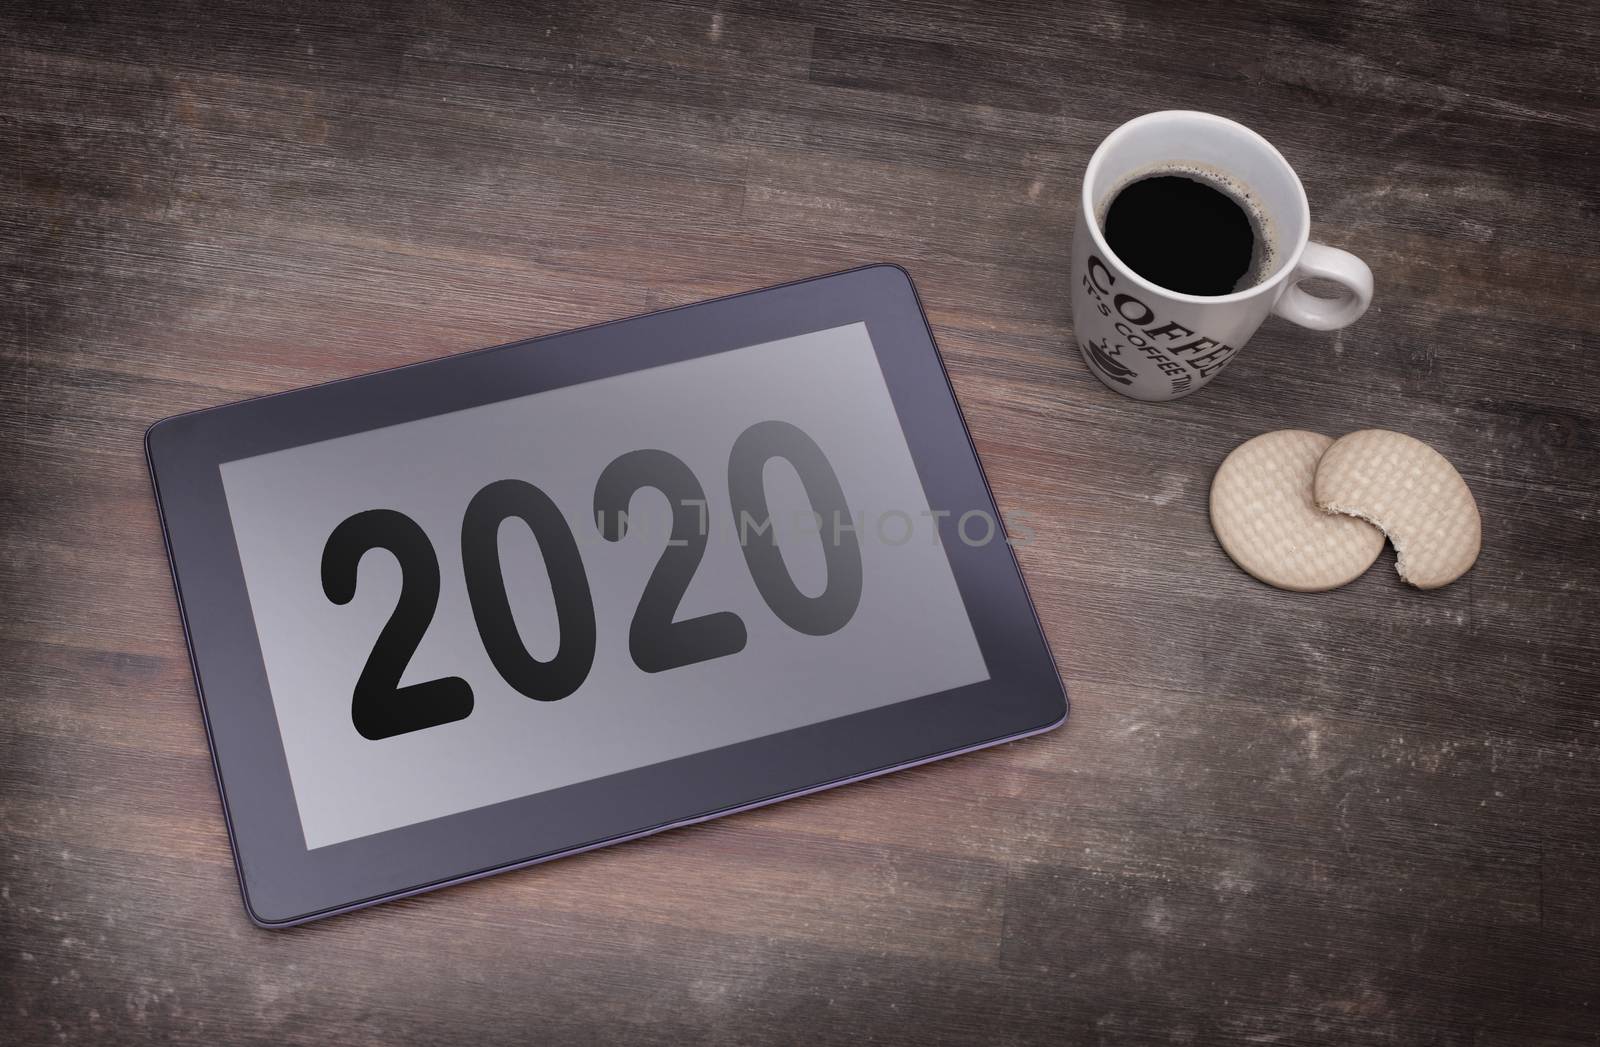 Tablet touch computer gadget on wooden table, vintage look - 2020